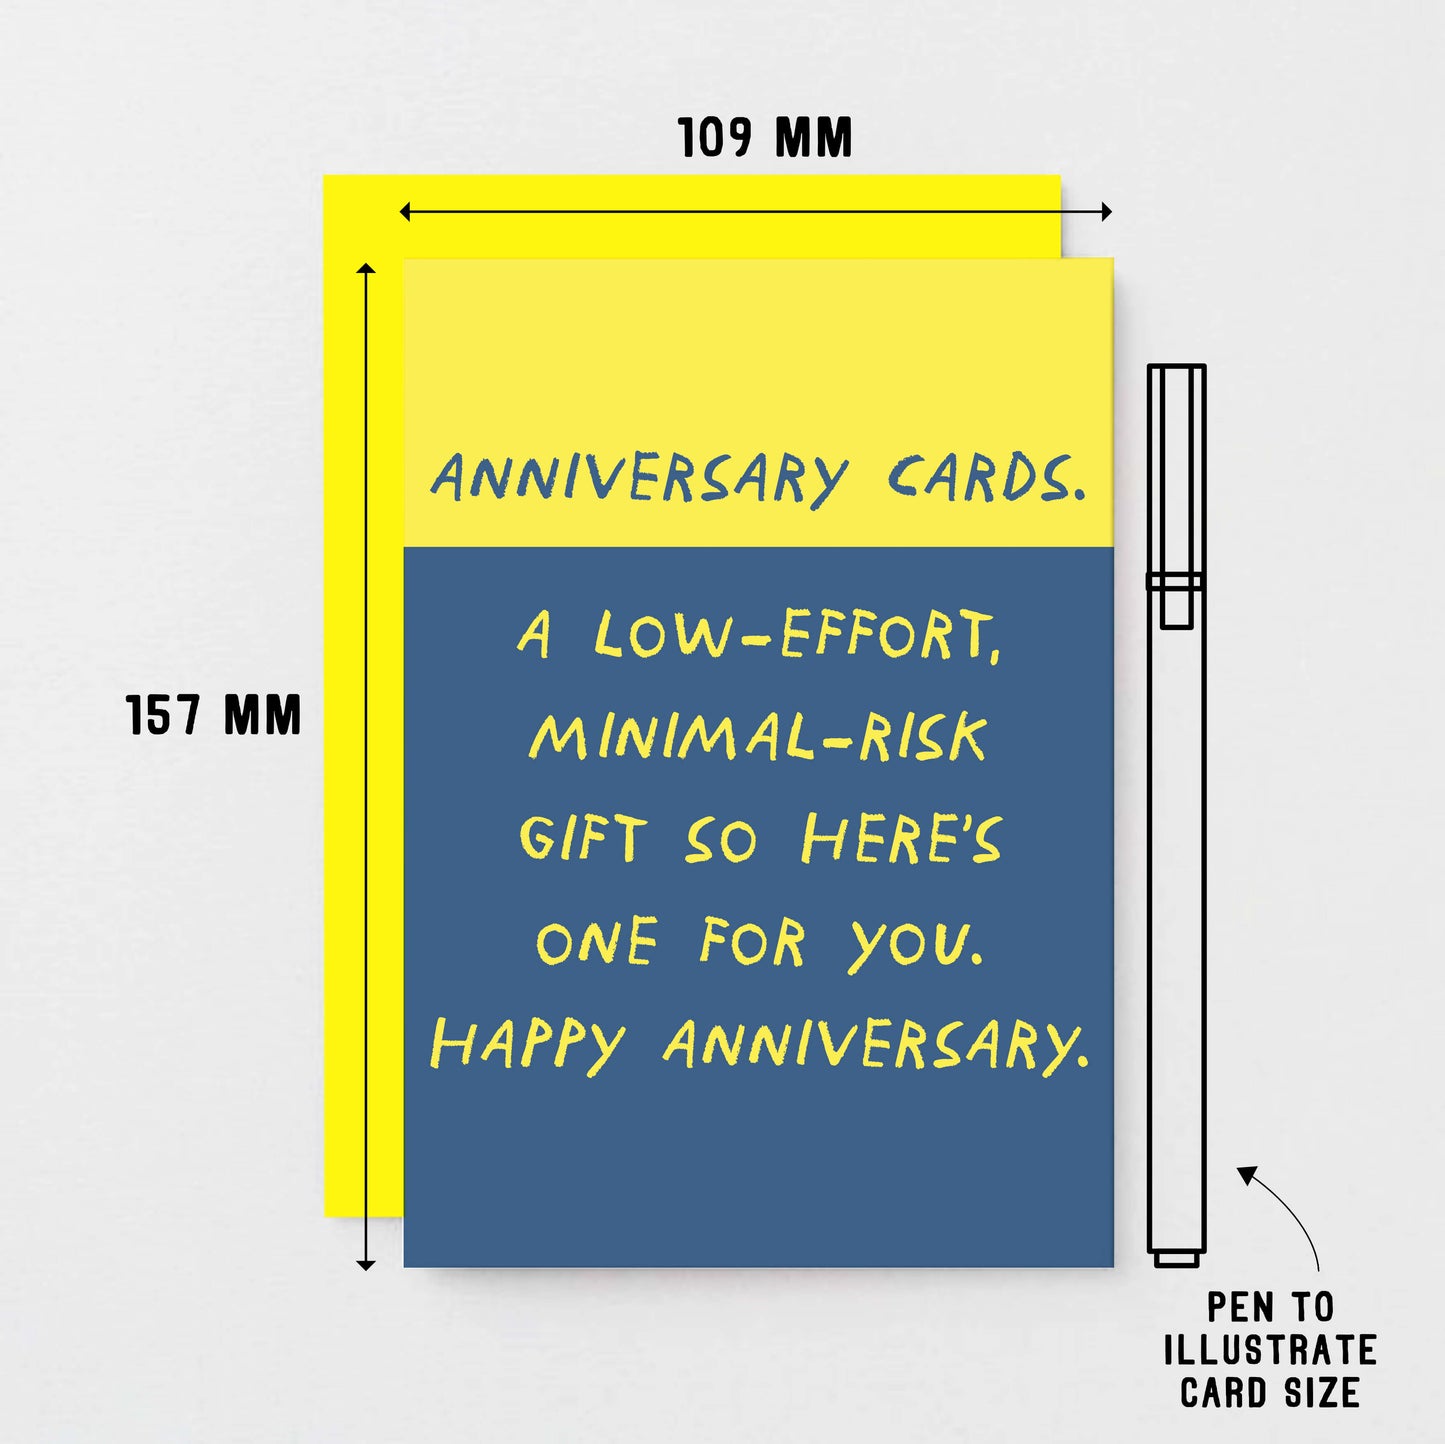 Anniversary Card by SixElevenCreations. Read Anniversary Cards. A low-effort, minimal-risk gift so here's one for you. Happy Anniversary. Product Code SE2102A6